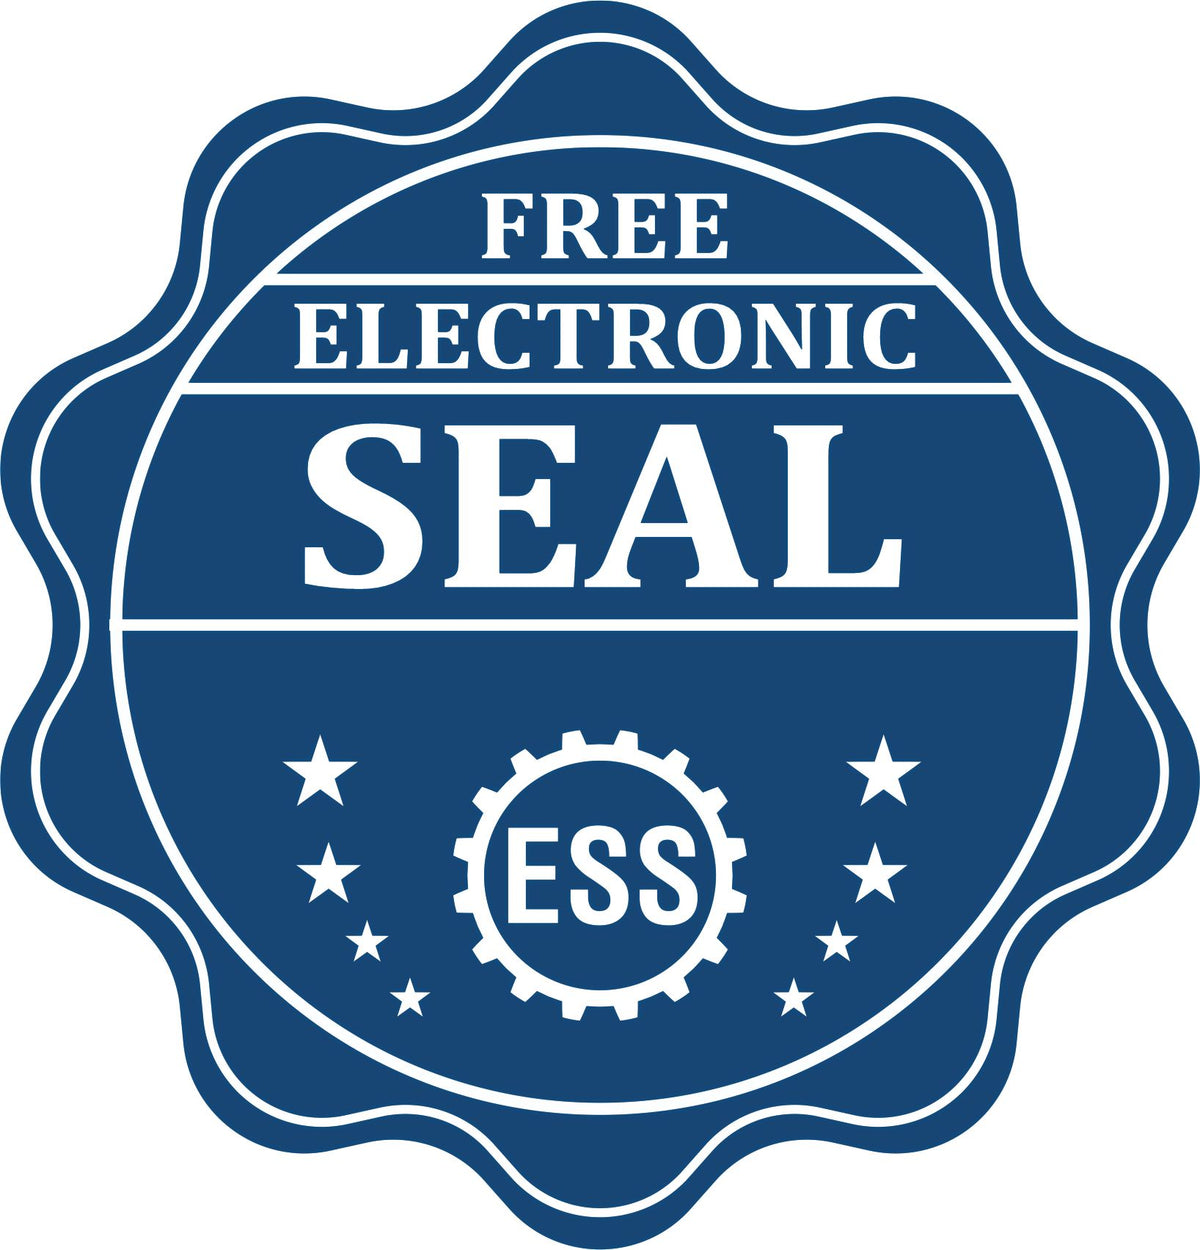 A badge showing a free electronic seal for the Gift Colorado Geologist Seal with stars and the ESS gear on the emblem.